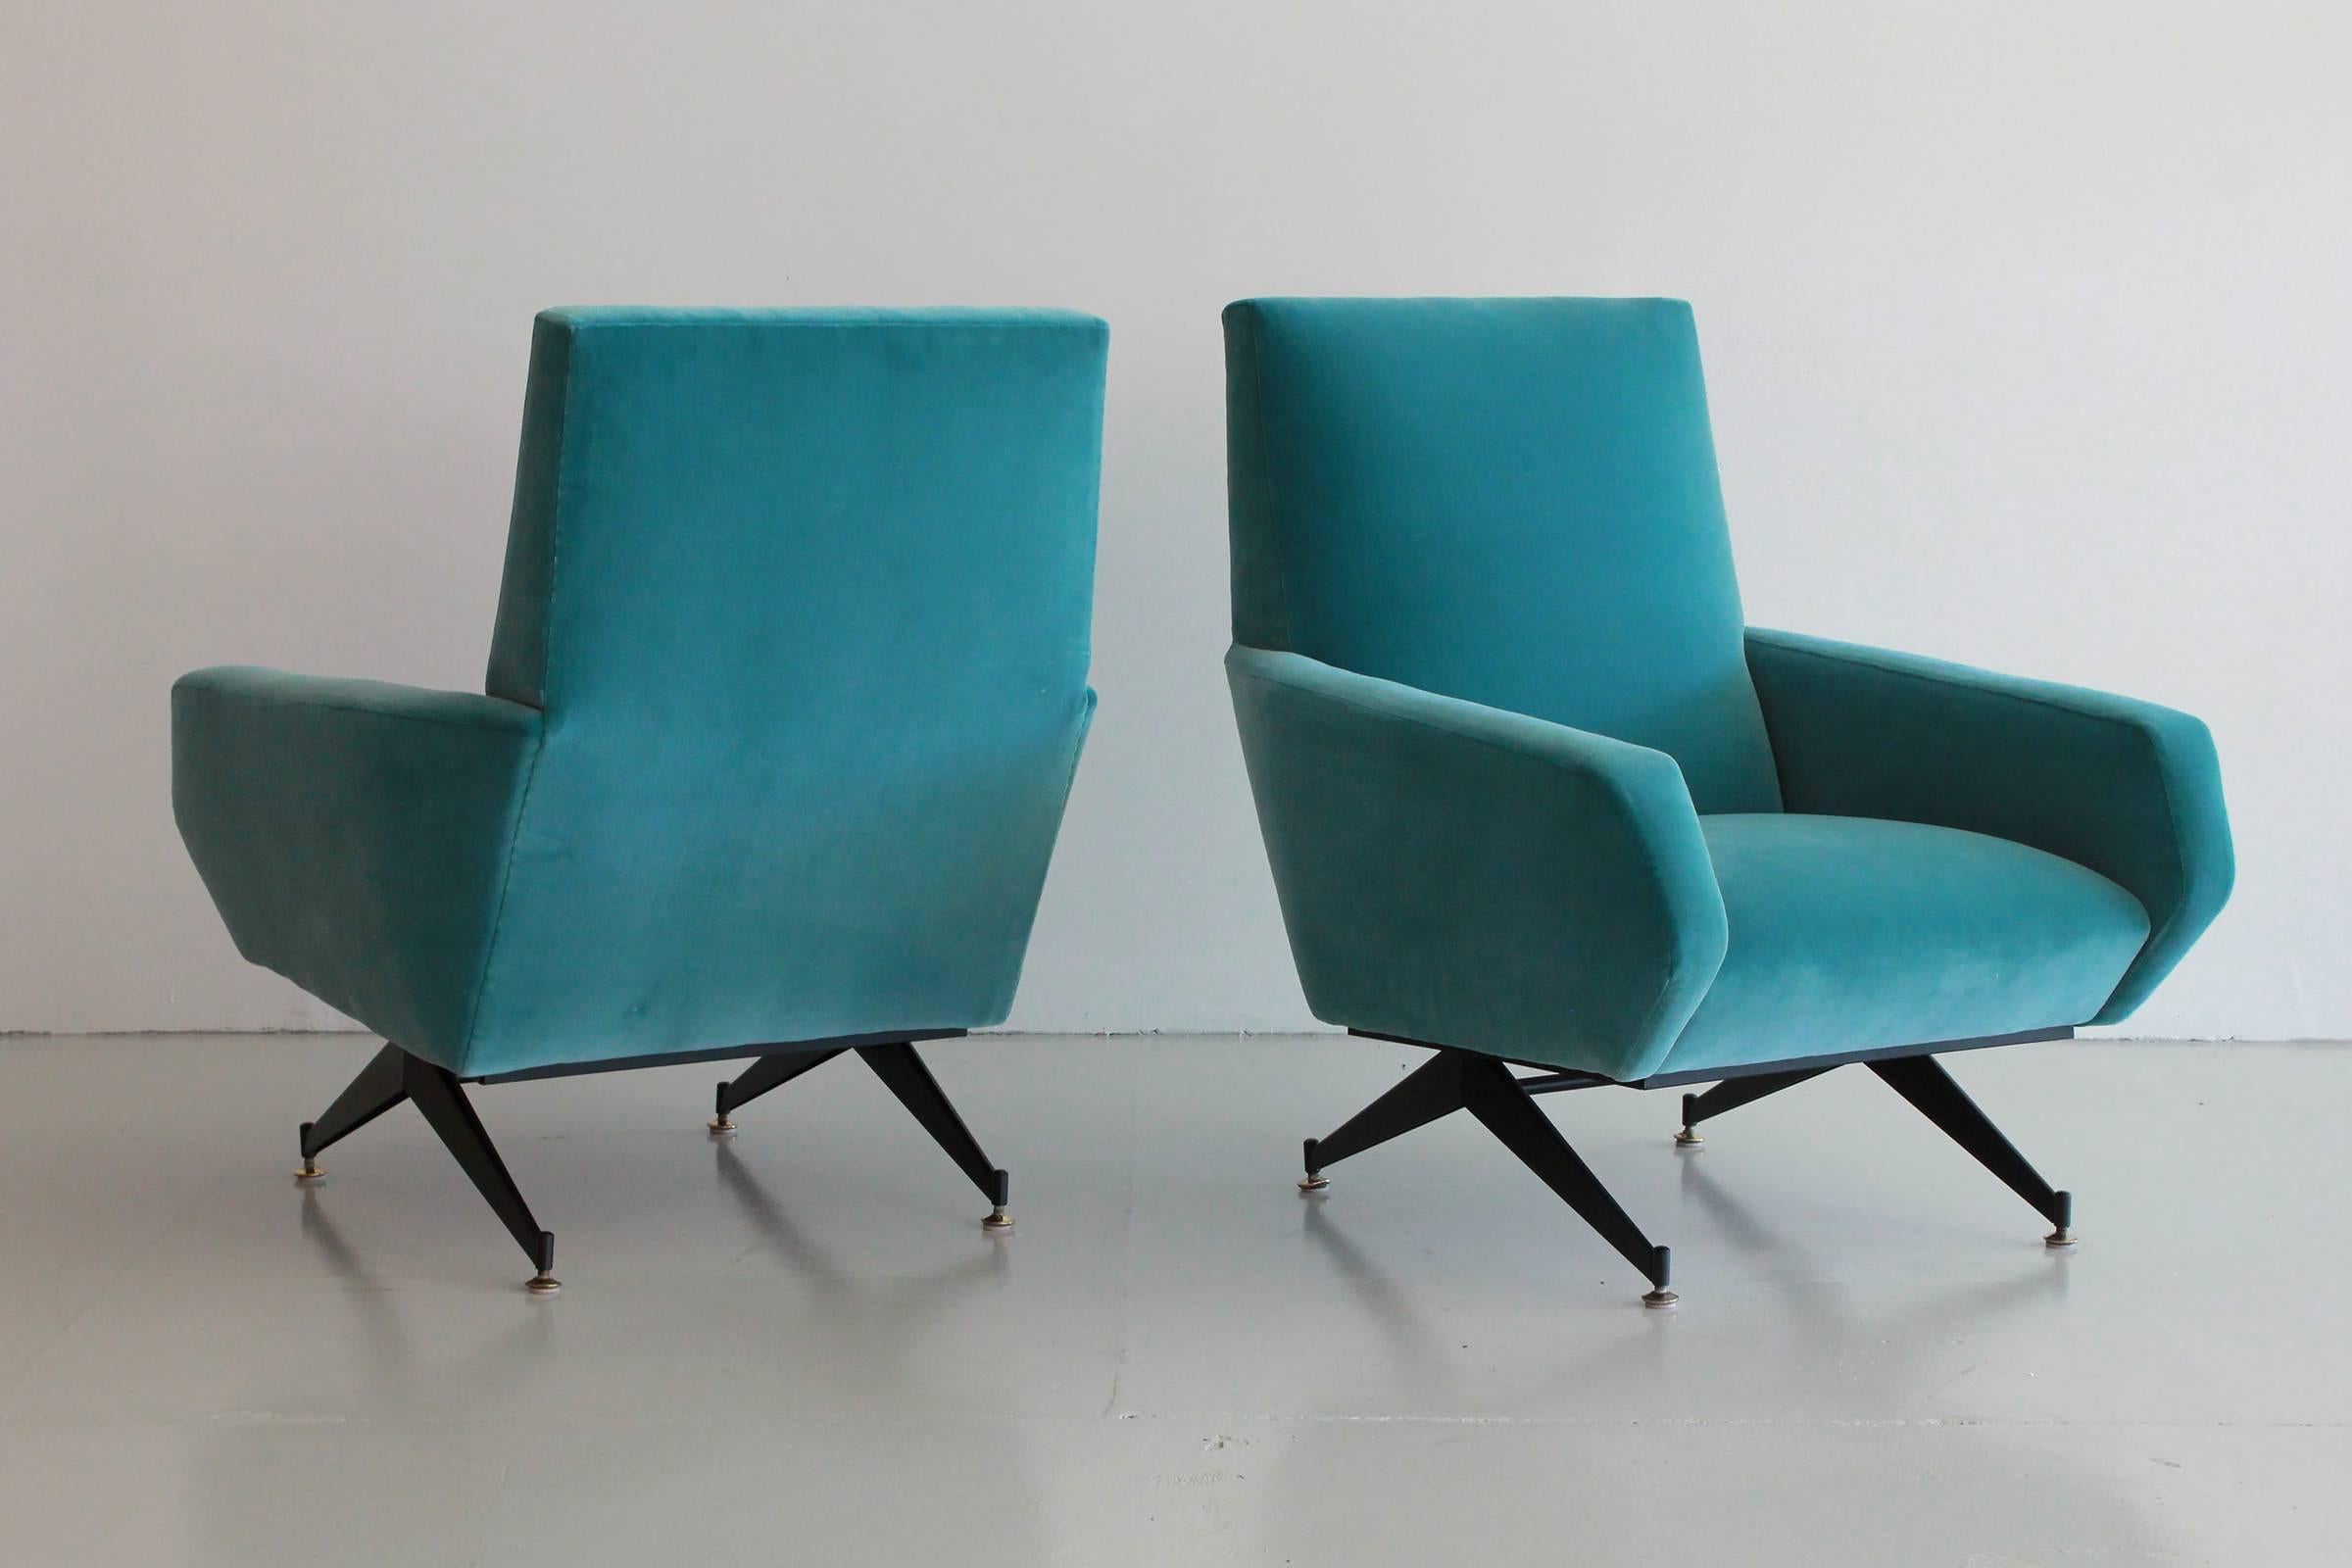 Gorgeous pair of Italian club chairs with great lines in the style of Minotti. Black iron base and brass feet. Reupholstered in gorgeous teal blue velvet. Sold as a pair.